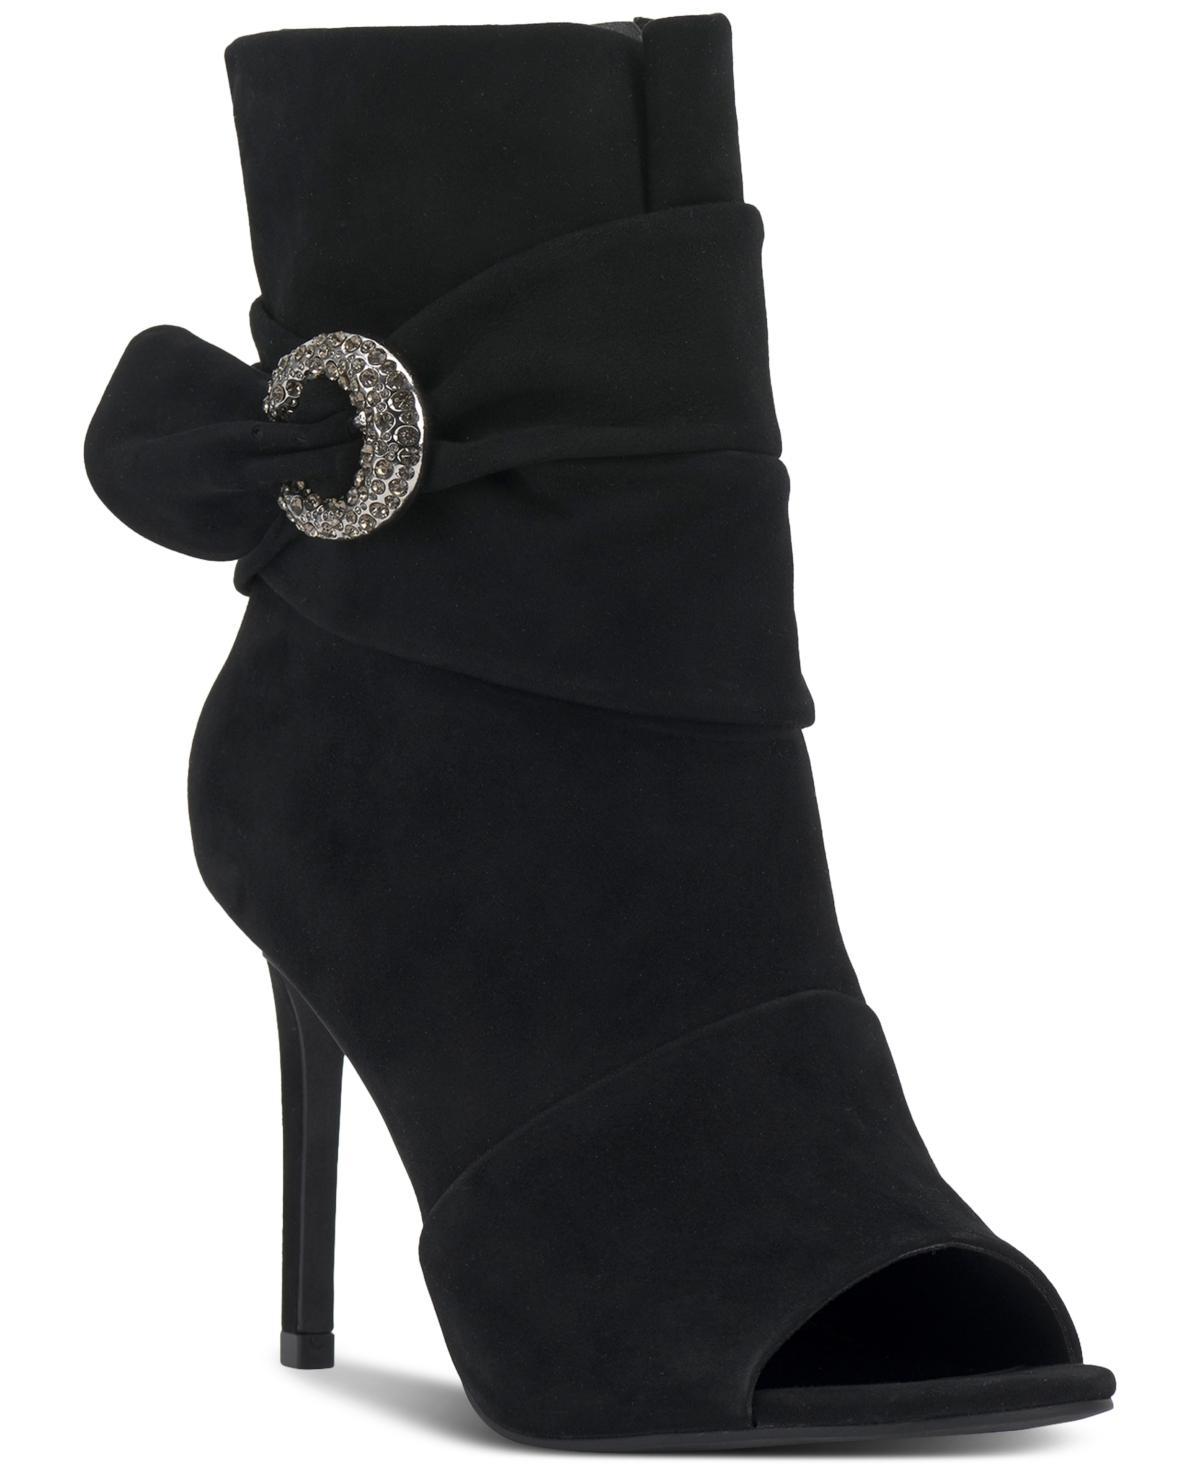 Vince Camuto Antaya Open Toe Bootie Product Image